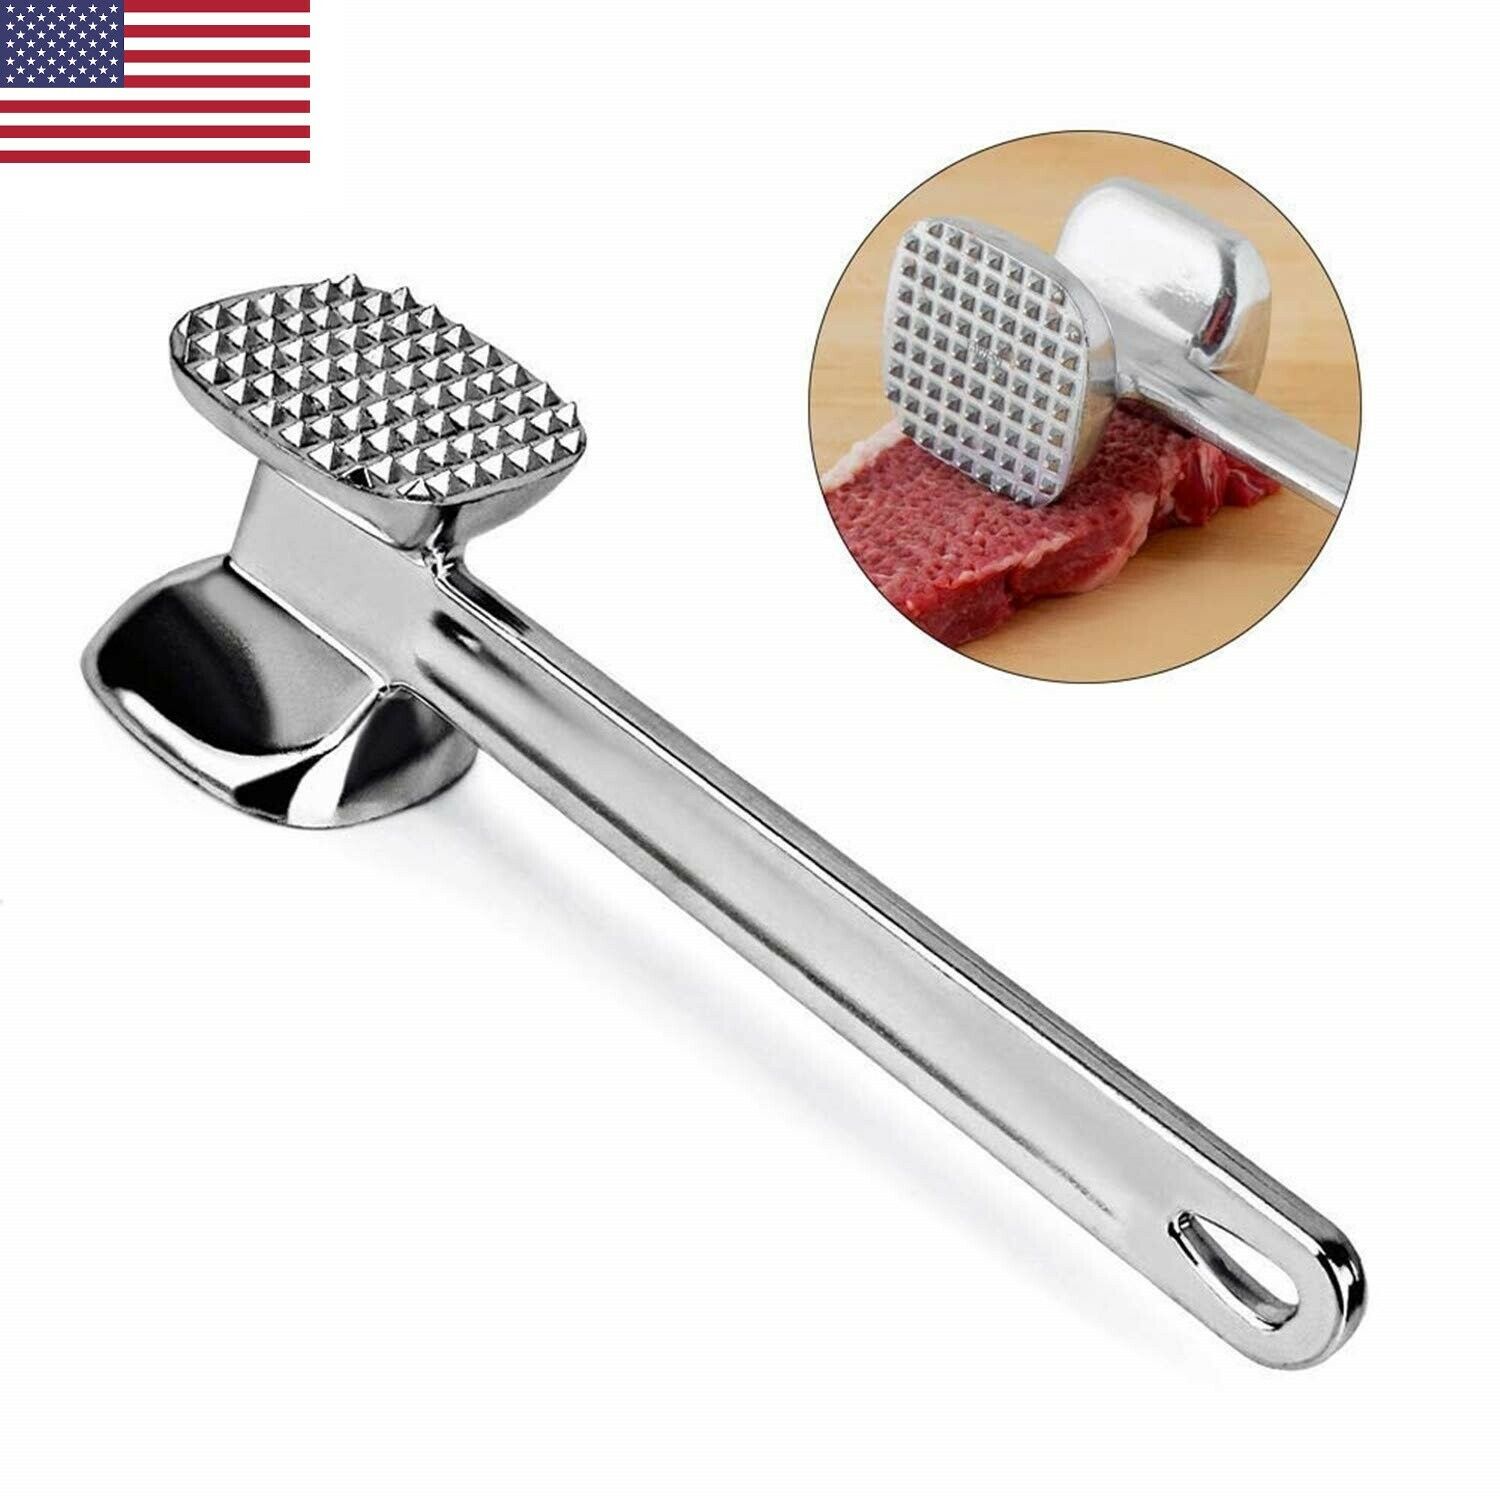 Us Meat Tenderizer Mallet Small Travel Food Hammer Mallet Tool Beef Pork Chic